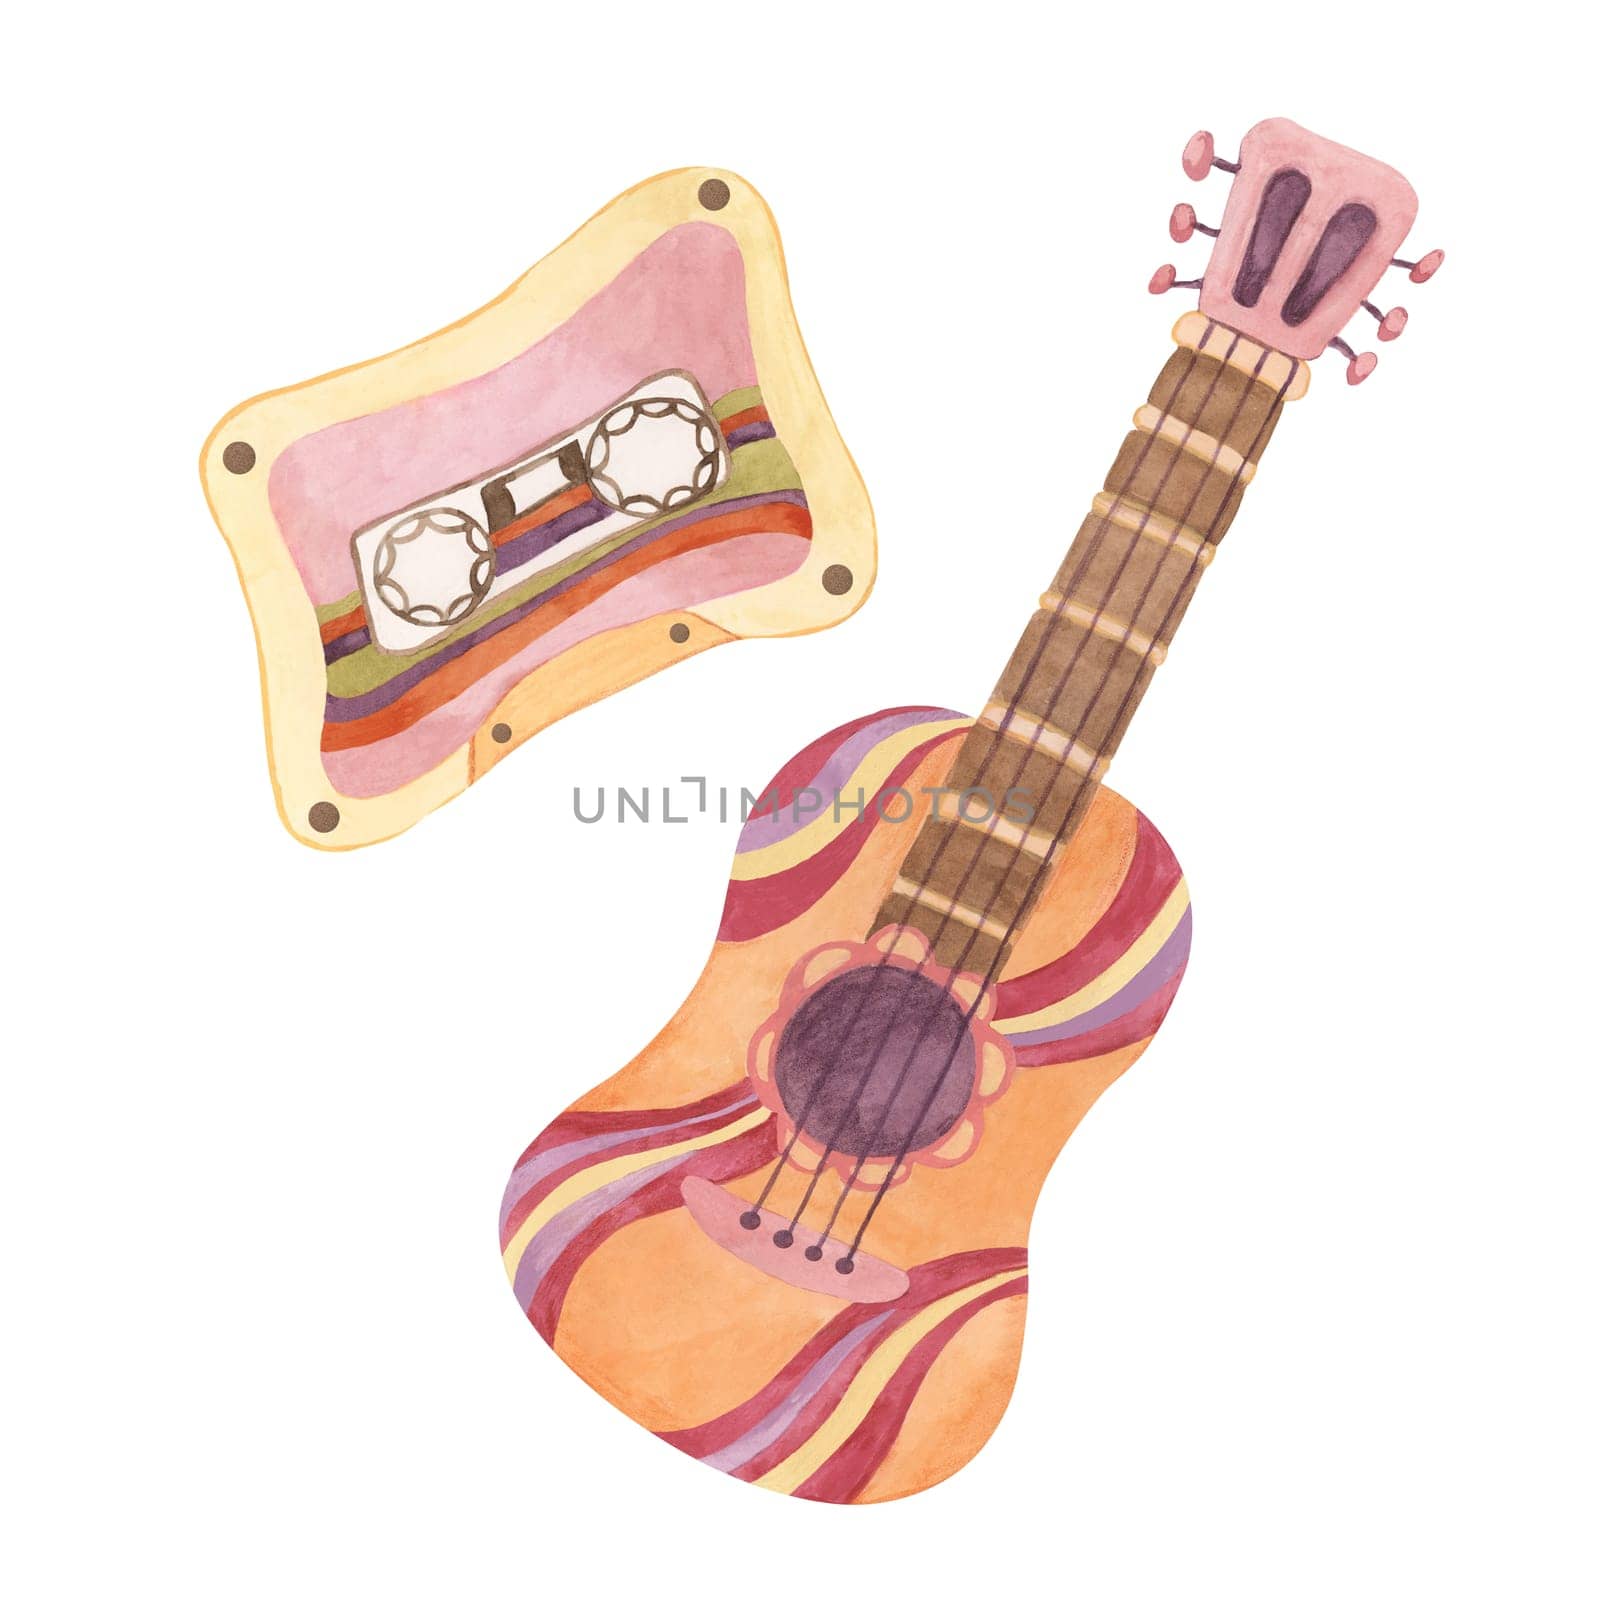 Retro audiotape and guitar 1970s style. Hippie music culture nostalgic clipart. Watercolor groovy illustration for printing, stickers, flyers, tshirts by Fofito